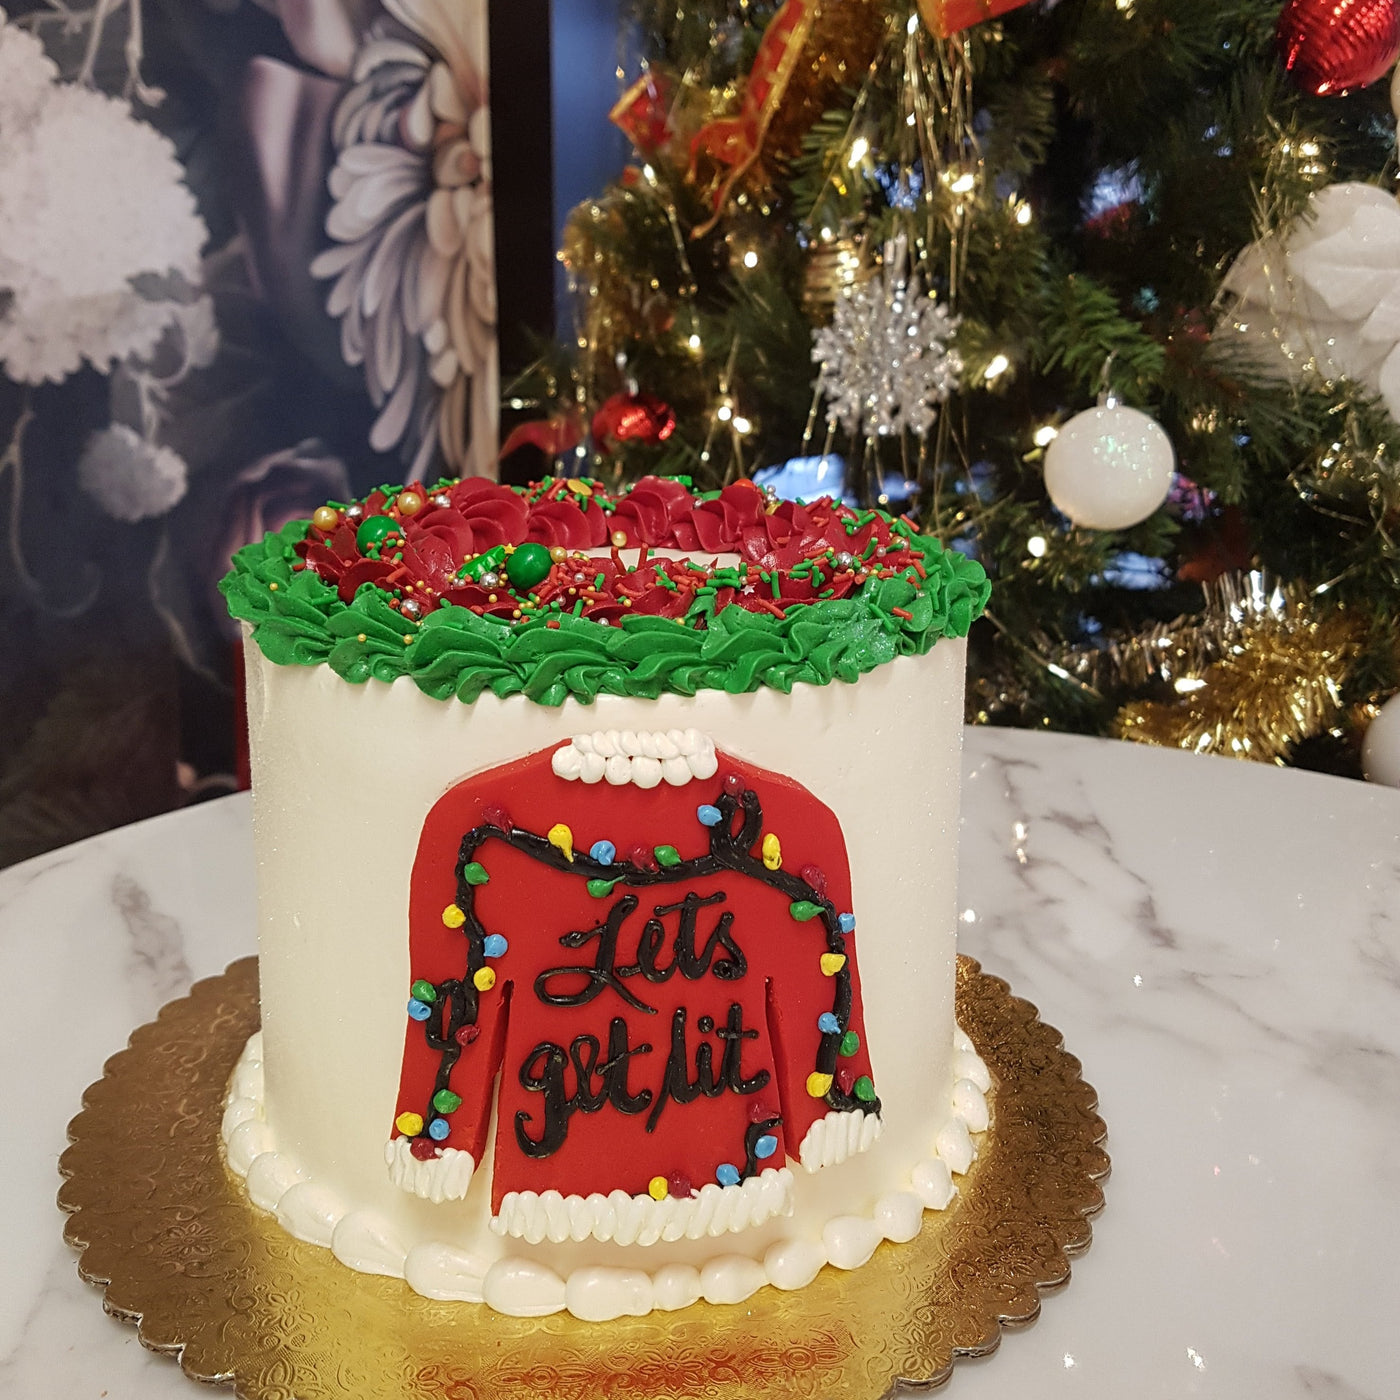 Ugly Christmas sweater cake, holiday party, yummy, delishus, online cake, delivery holiday office party cake